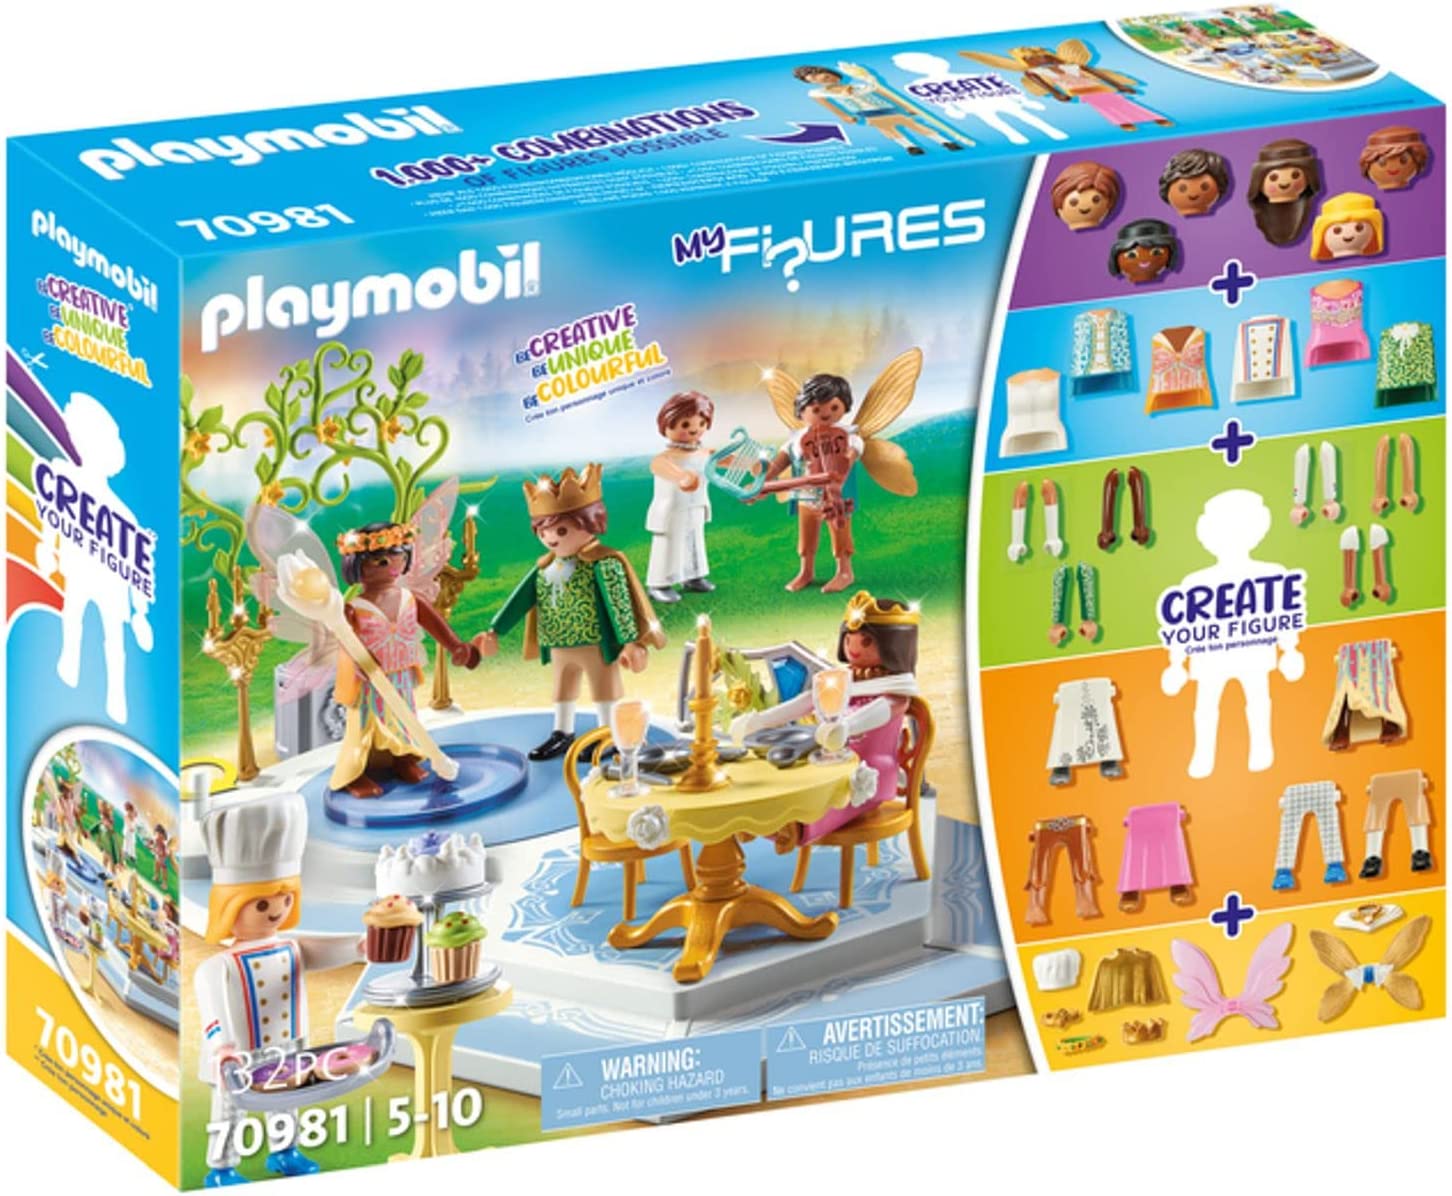 PLAYMOBIL My Figures 70981 The Magic Dance, 6 Toy Figures with Over 1000 Combination Possibilities, Princess Toy for Children from 5 Years